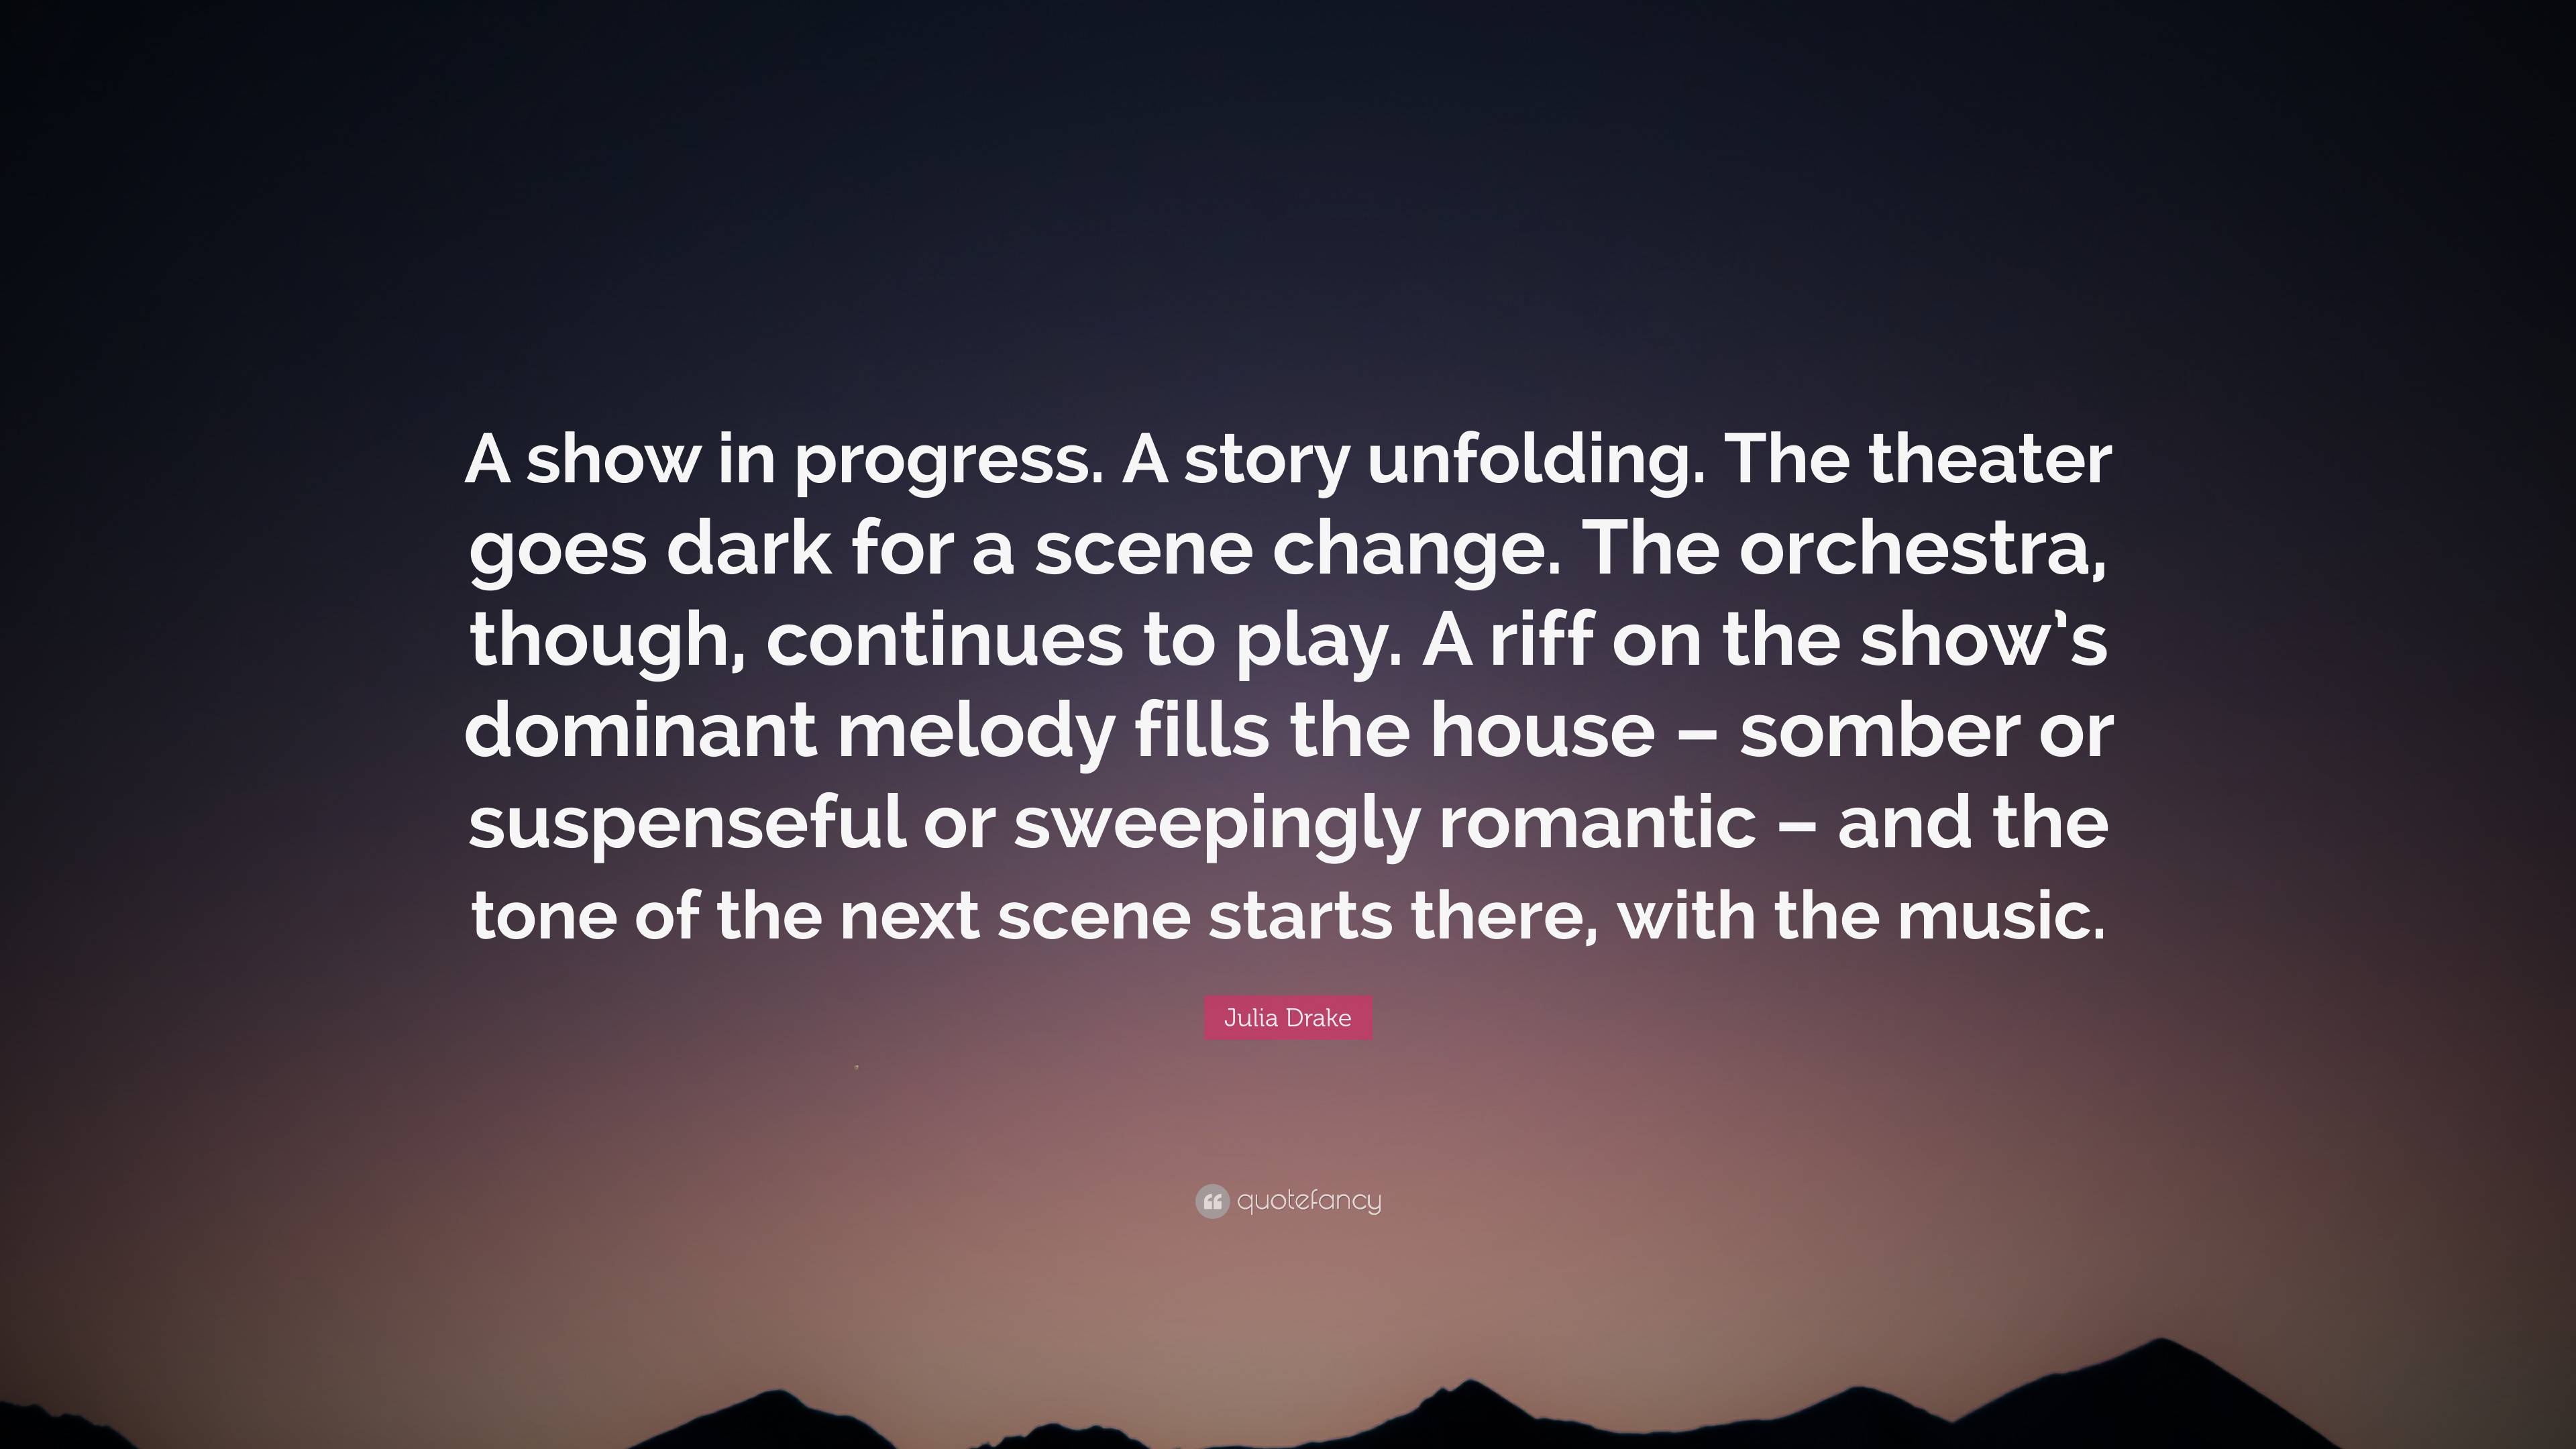 Julia Drake Quote: “A show in progress. A story unfolding. The theater ...